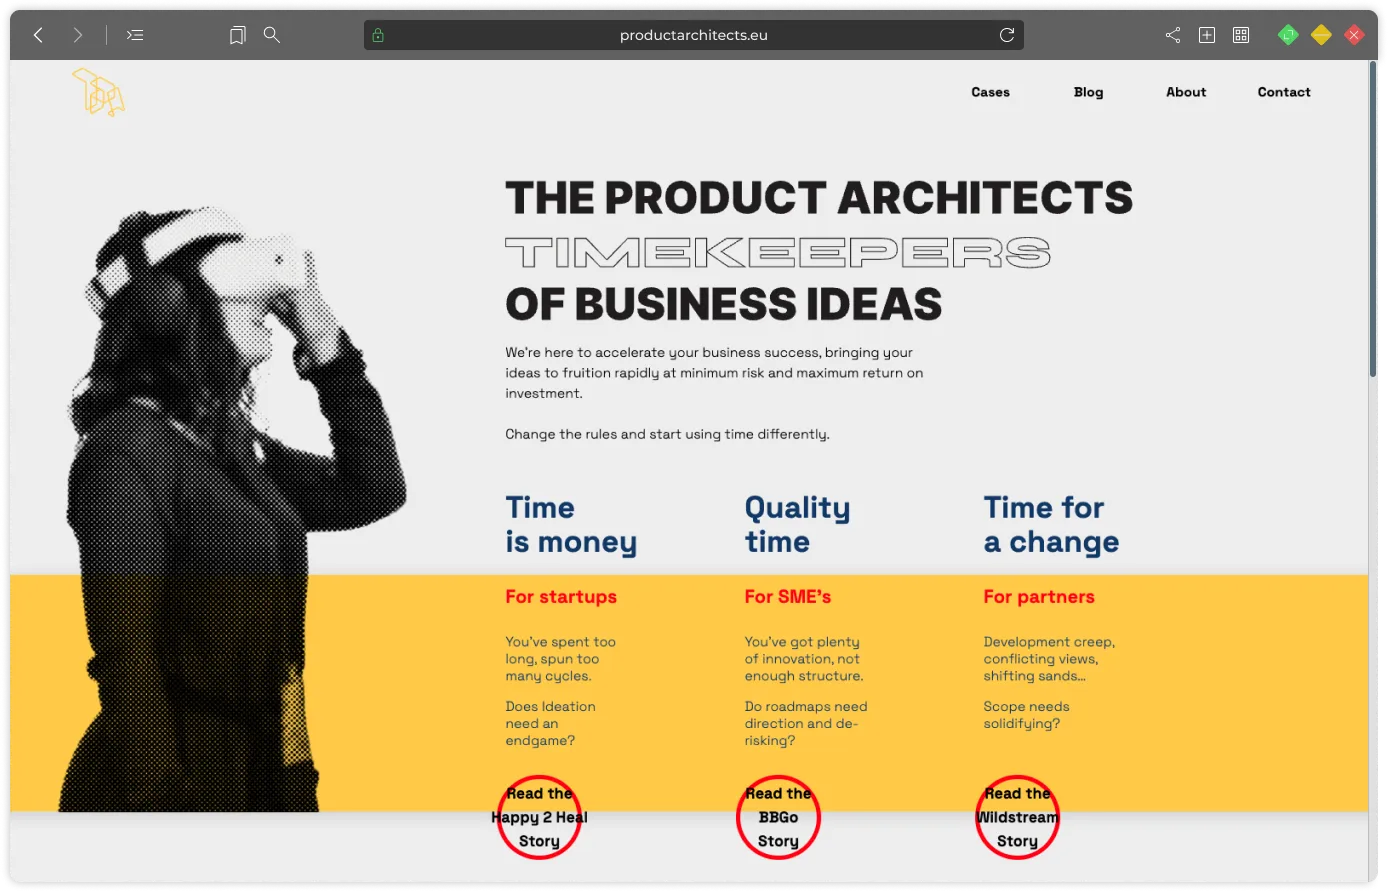 The Product Architects